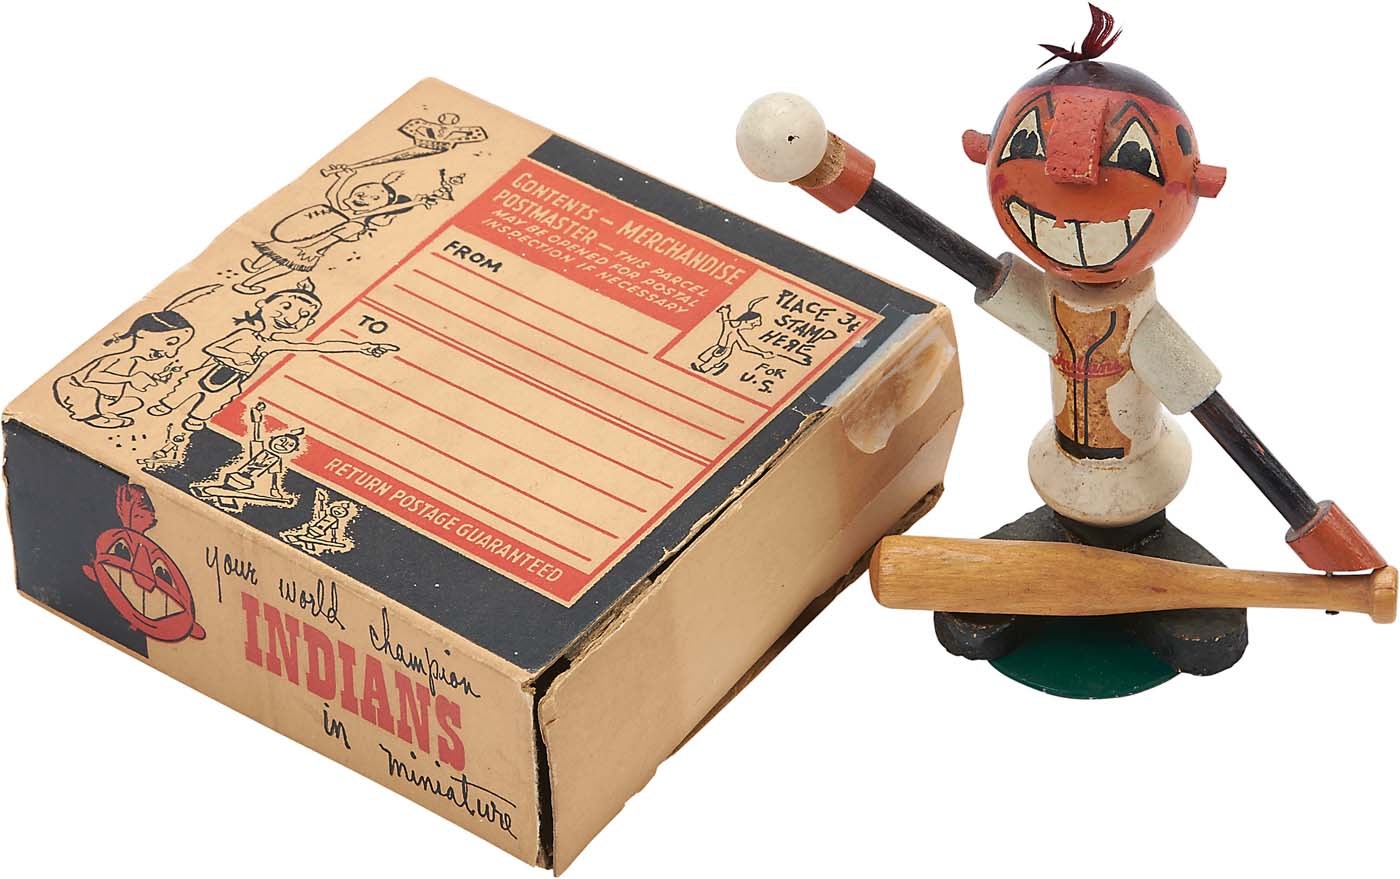 Cleveland Indians - Very Rare 1949 Cleveland Indians Wooden Figure with Box